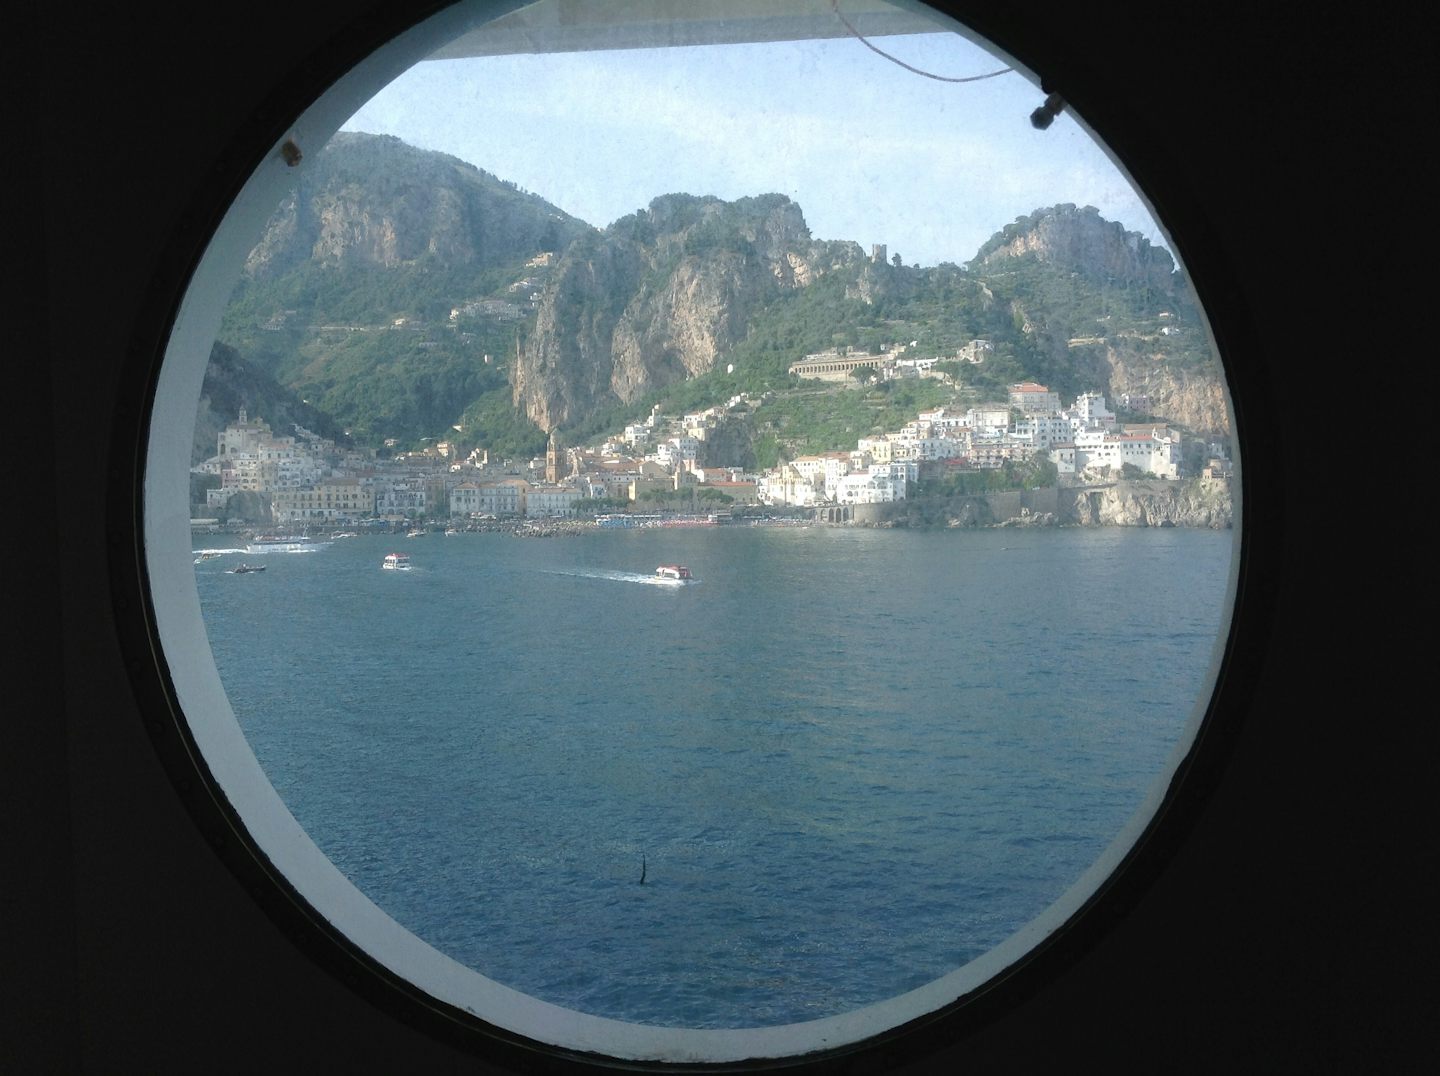 Amalfi from my stateroom of 7007